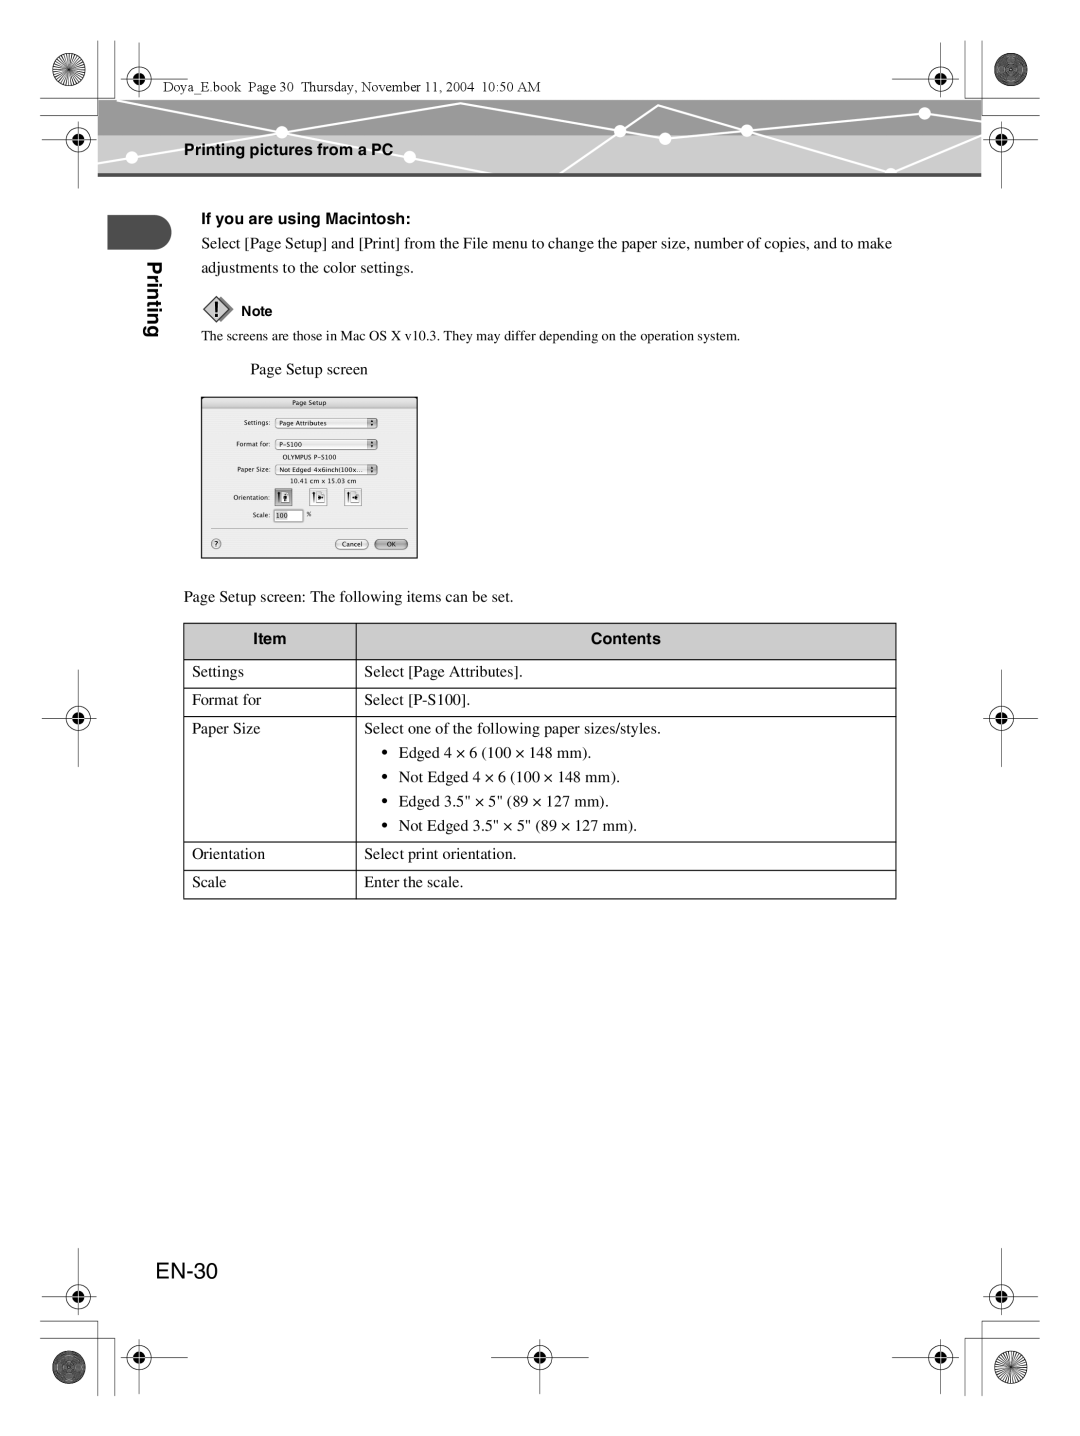 Olympus P-S100 user manual EN-30, Printing pictures from a PC, If you are using Macintosh, Contents 